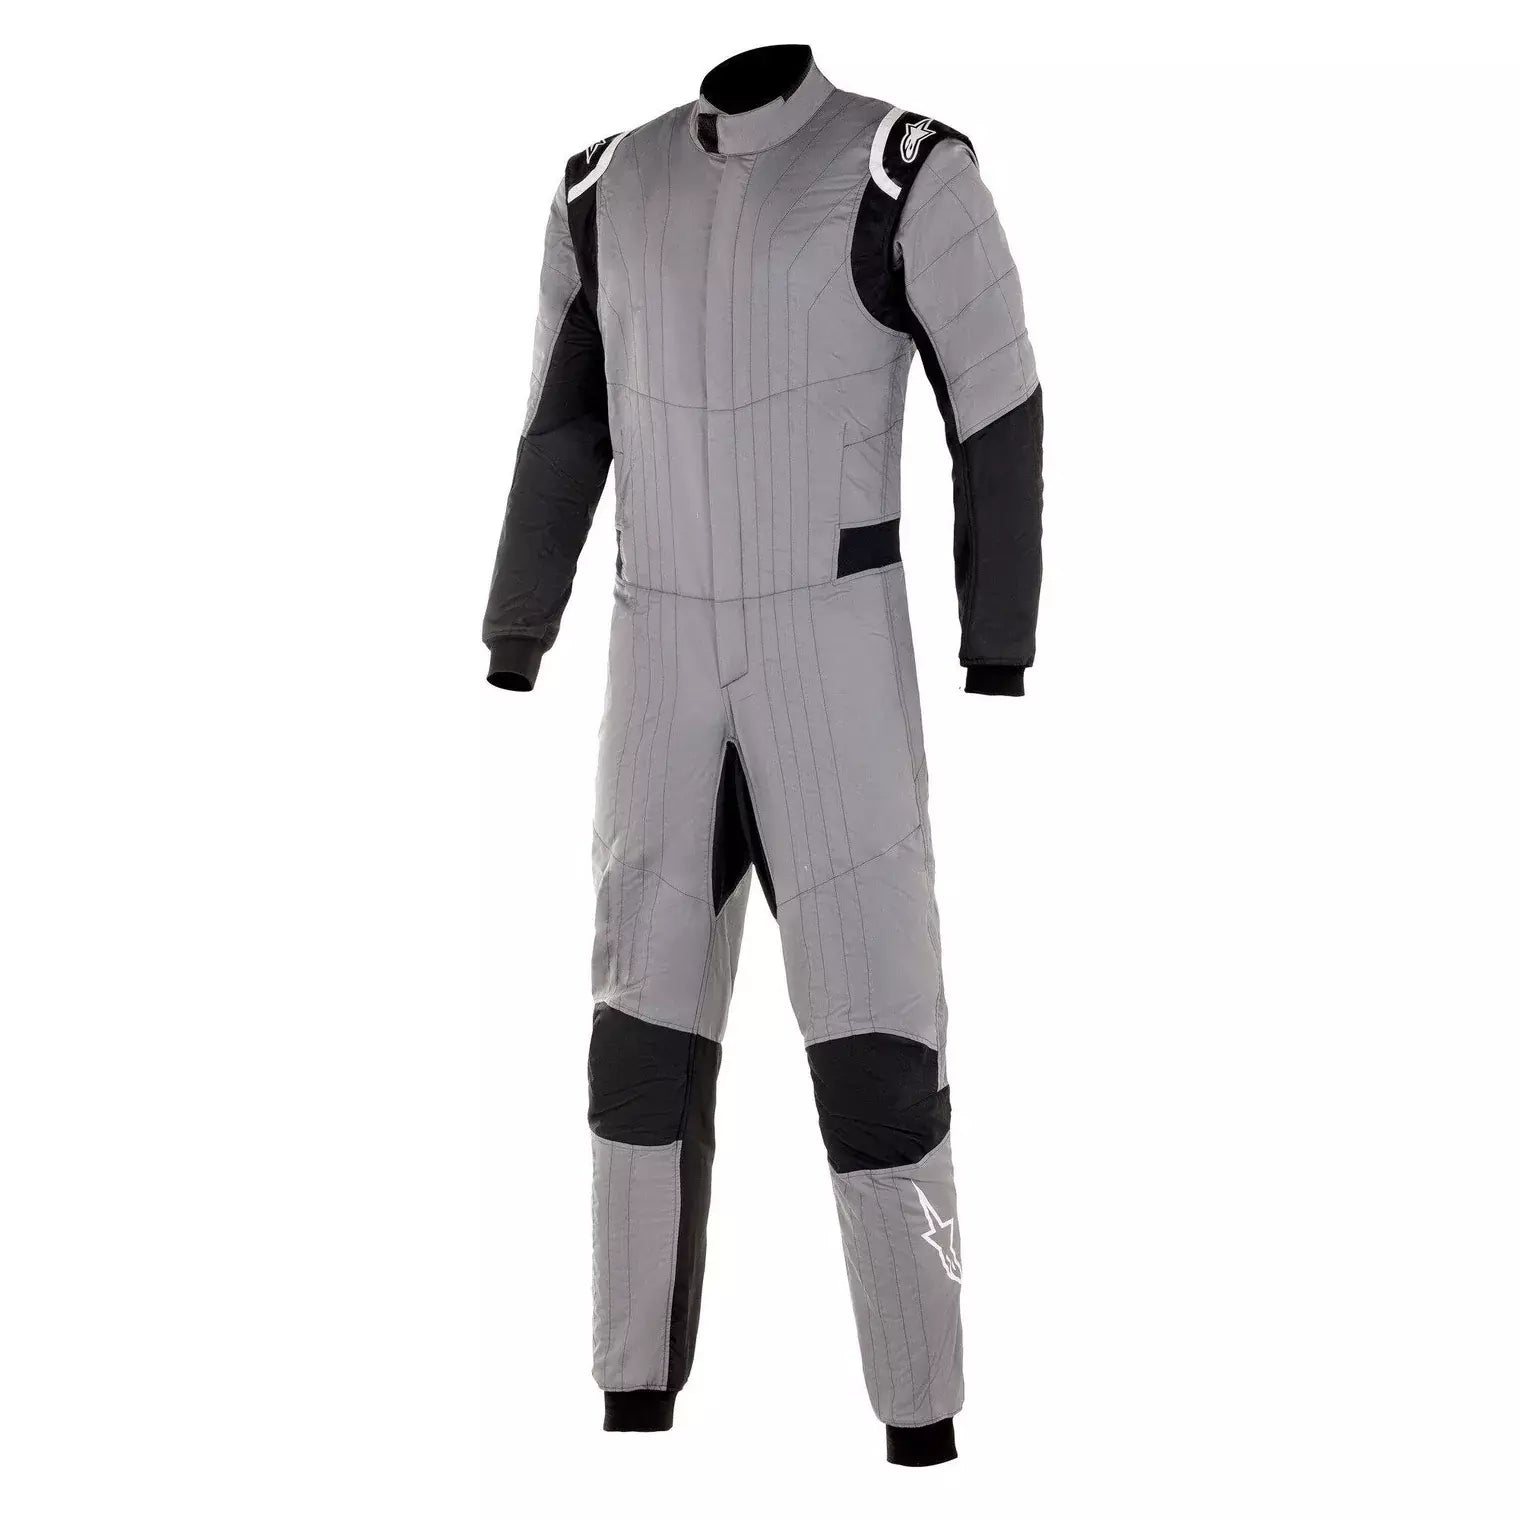 Alpinestars Suit Hypertech V2 Gray Large Safety Clothing Driving Suits main image